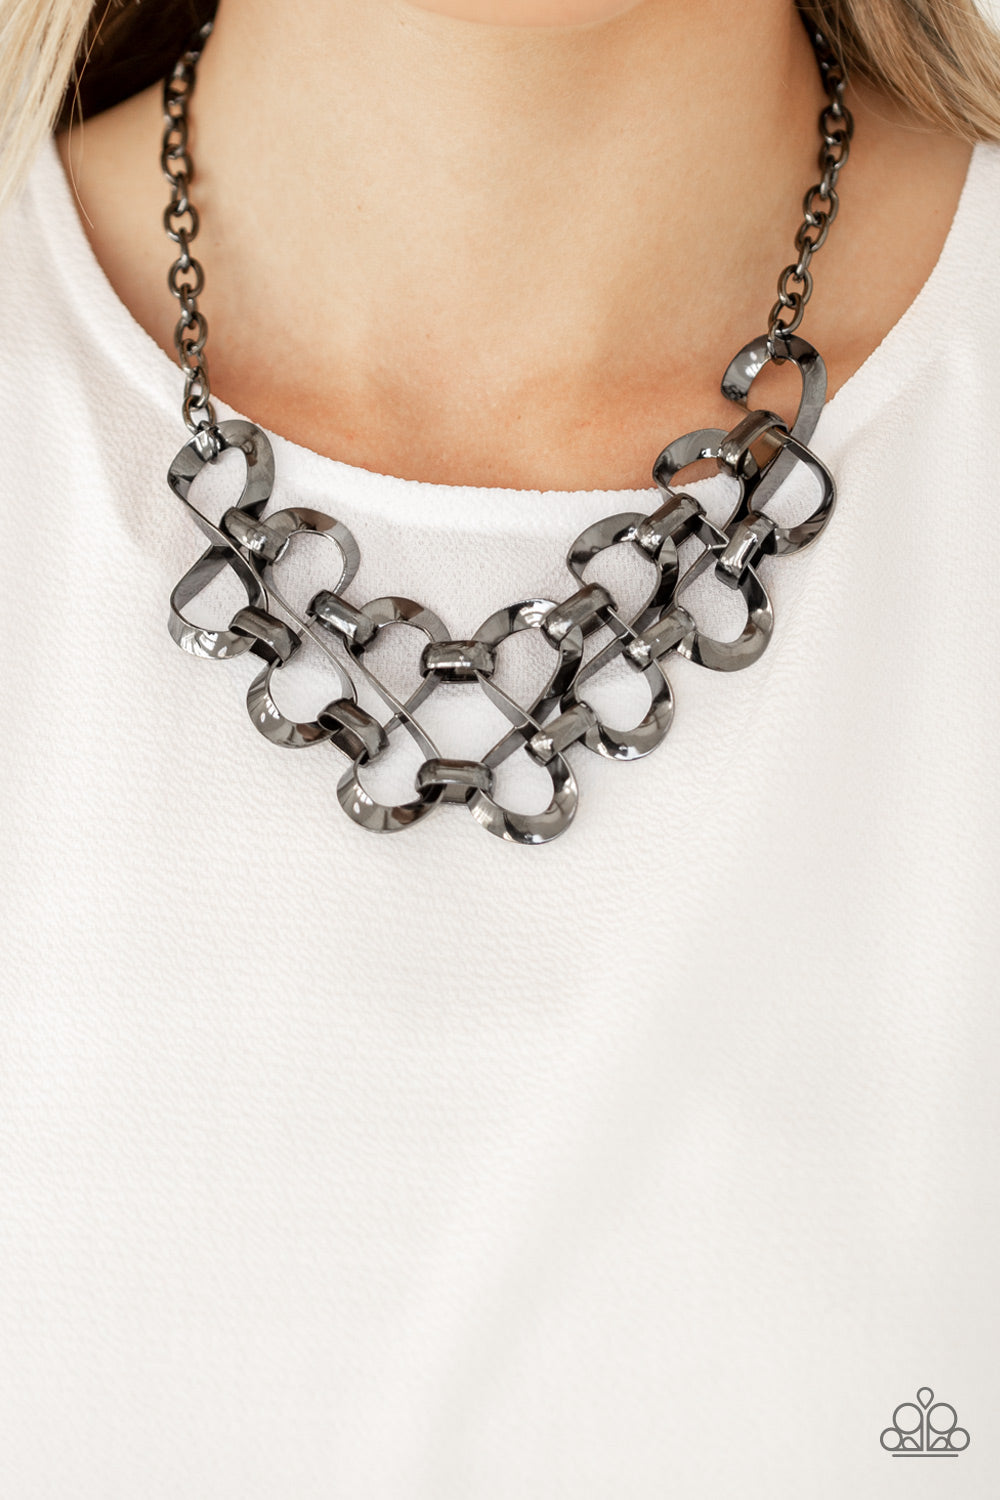 Work, Play, and Slay - Black/Gunmetal necklace